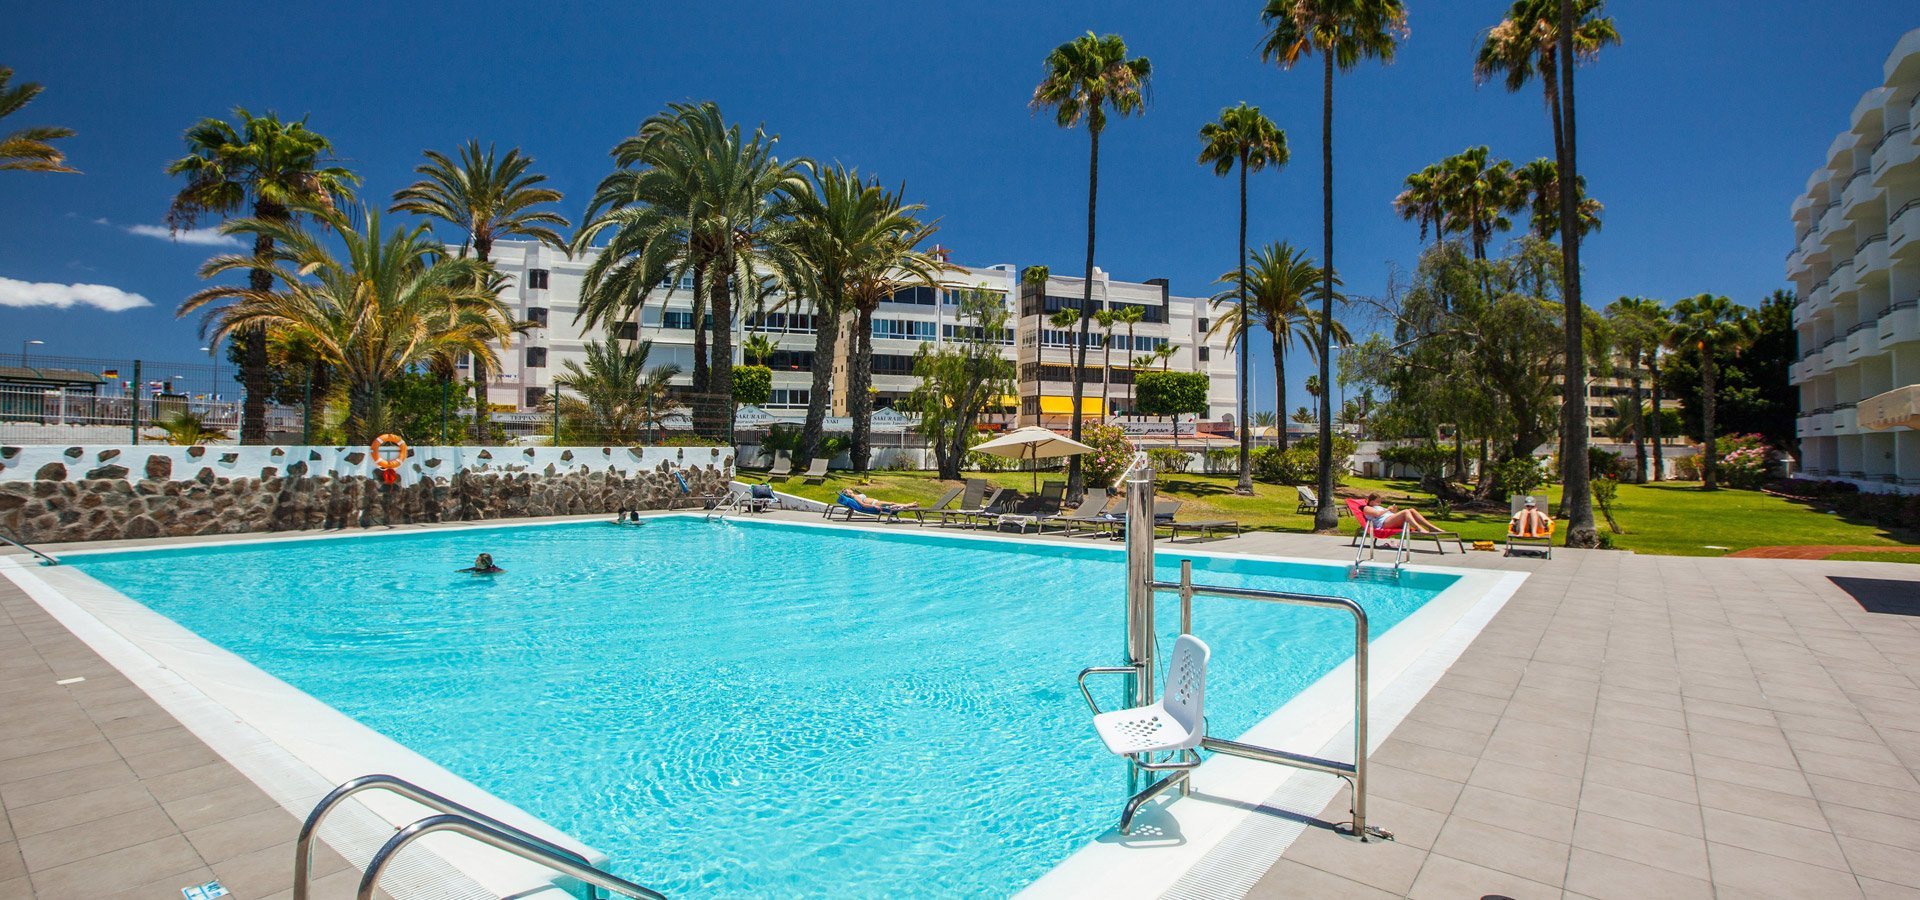 ONLINE CHECK-IN - Abora Catarina by Lopesan Hotels - Gran Canaria